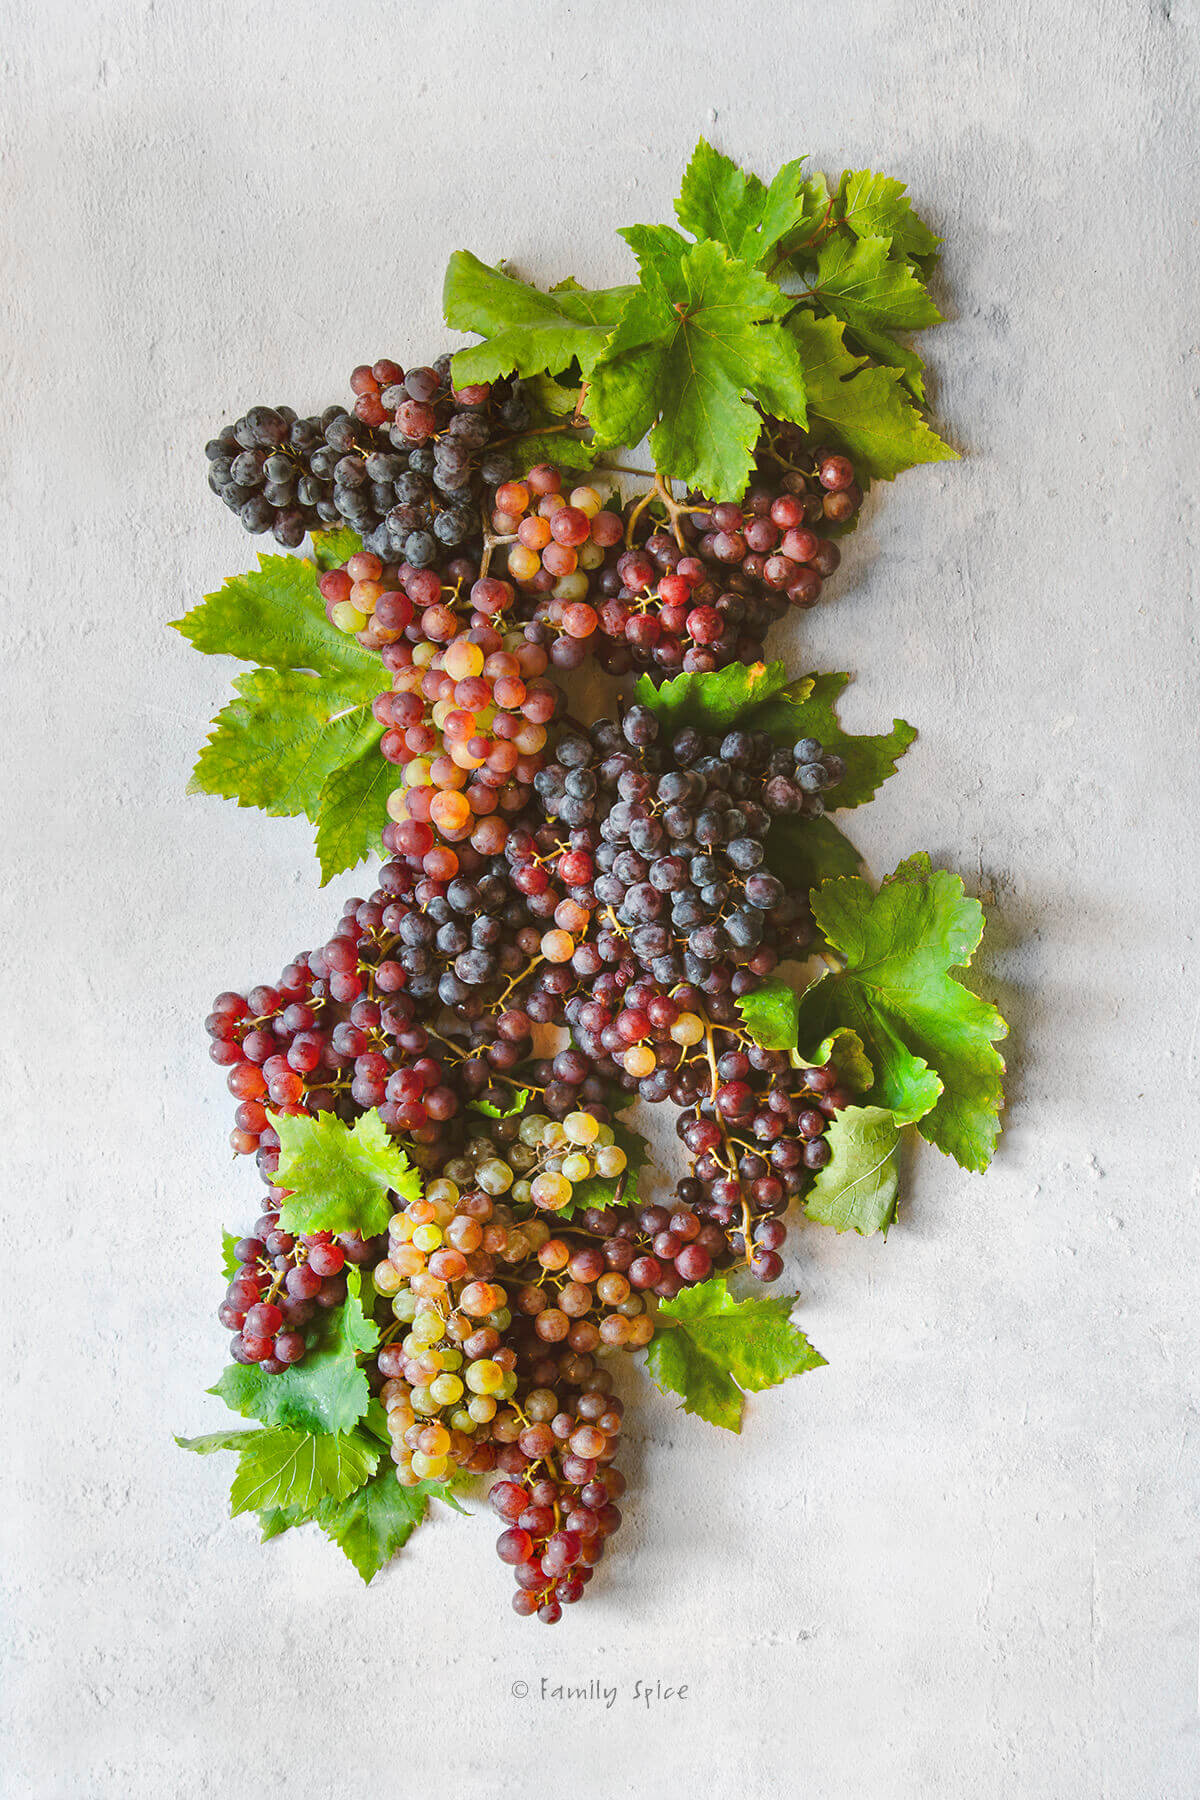 Assorted red, green and black grapes with grape leaves on concrete